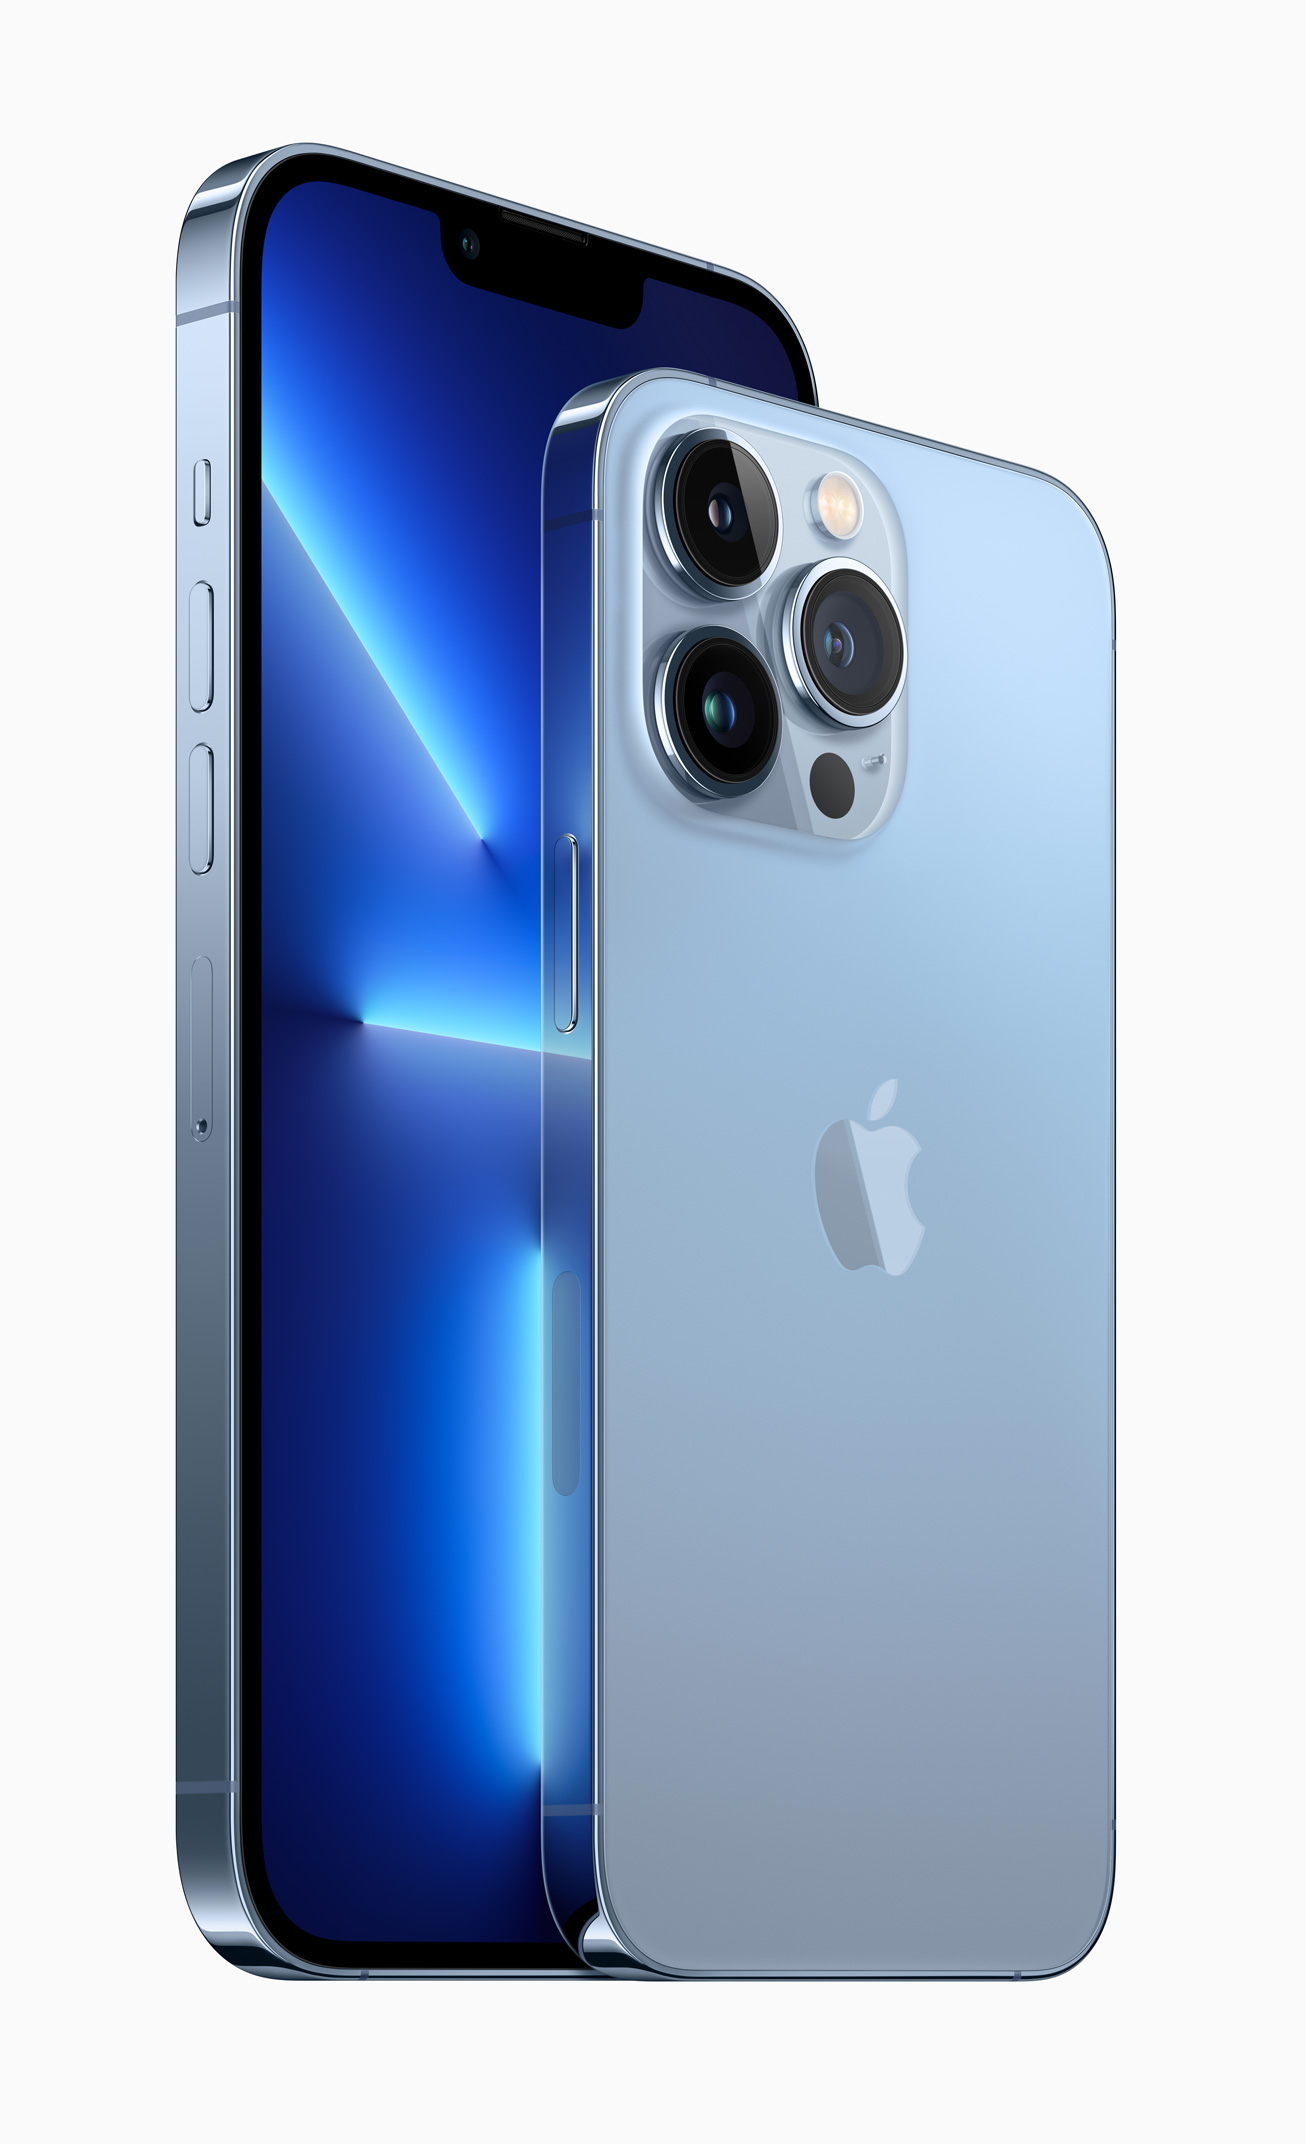 Apple Iphone 13 Pro And Iphone 13 Pro Max Announced With 5 Core Gpu A15 Bionic Prores Video Capture 1 Hz Promotion Display And Dual Esim Support Notebookcheck Net News